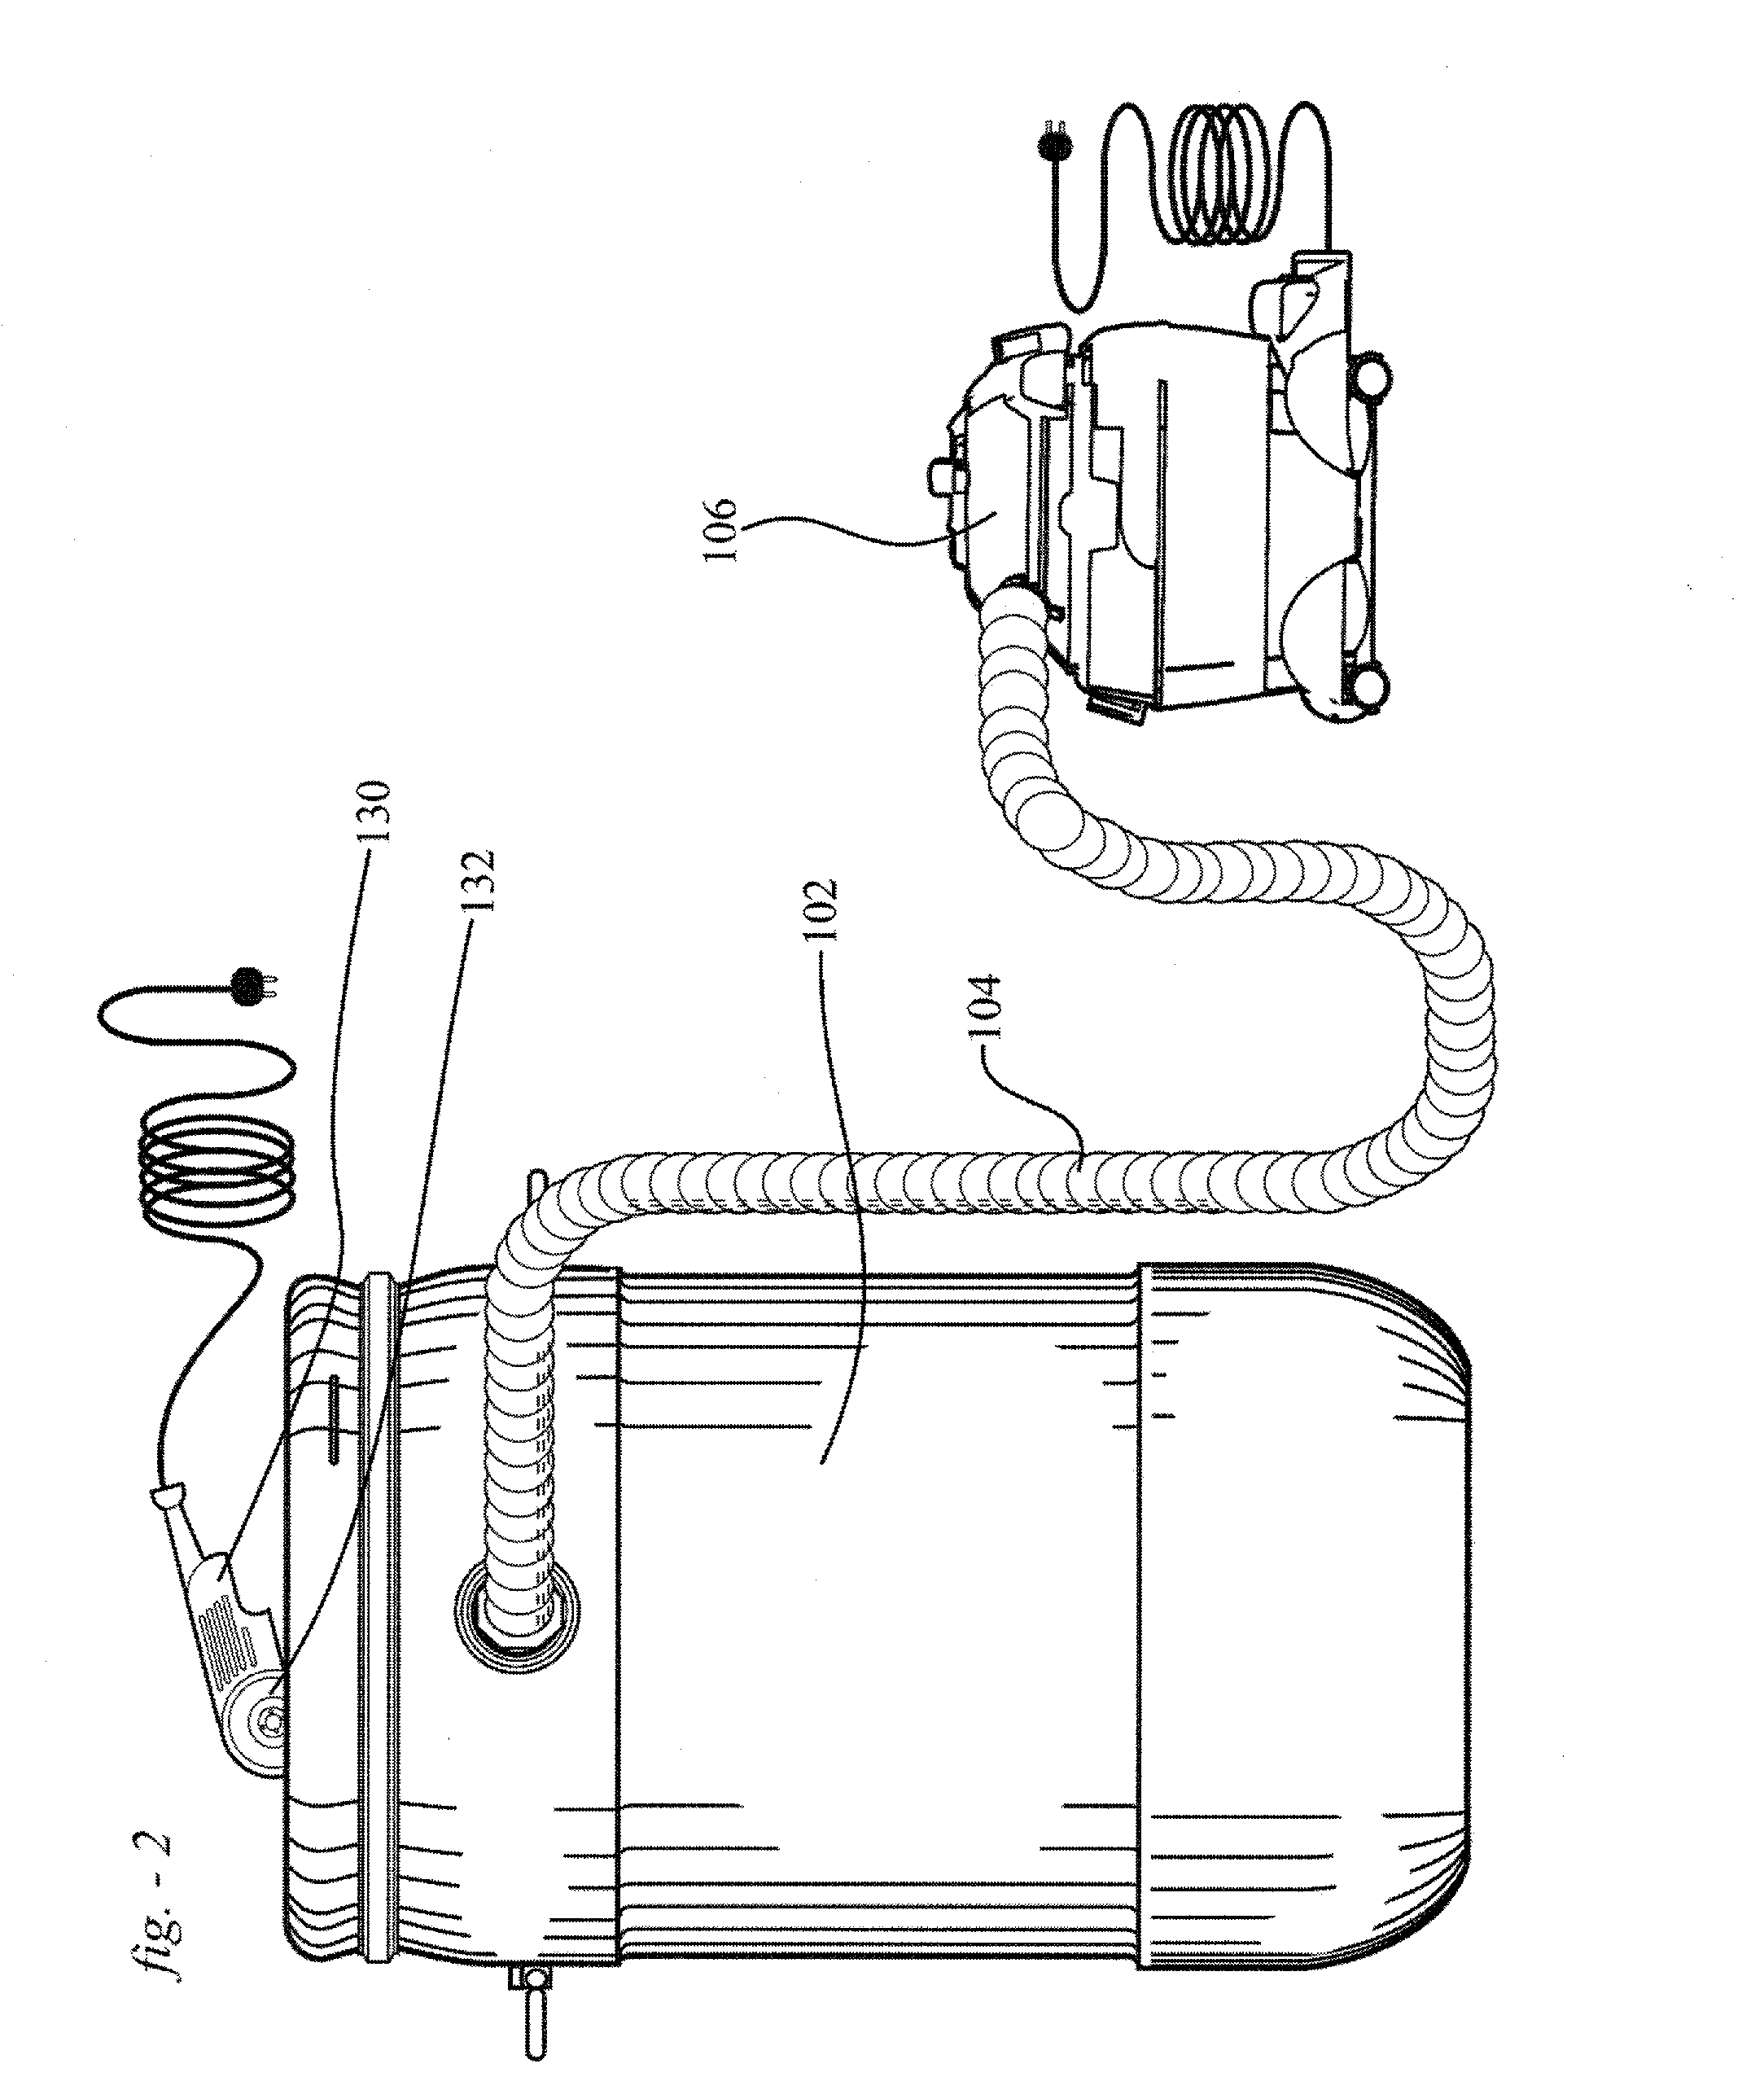 Tile cutting and dust collection system